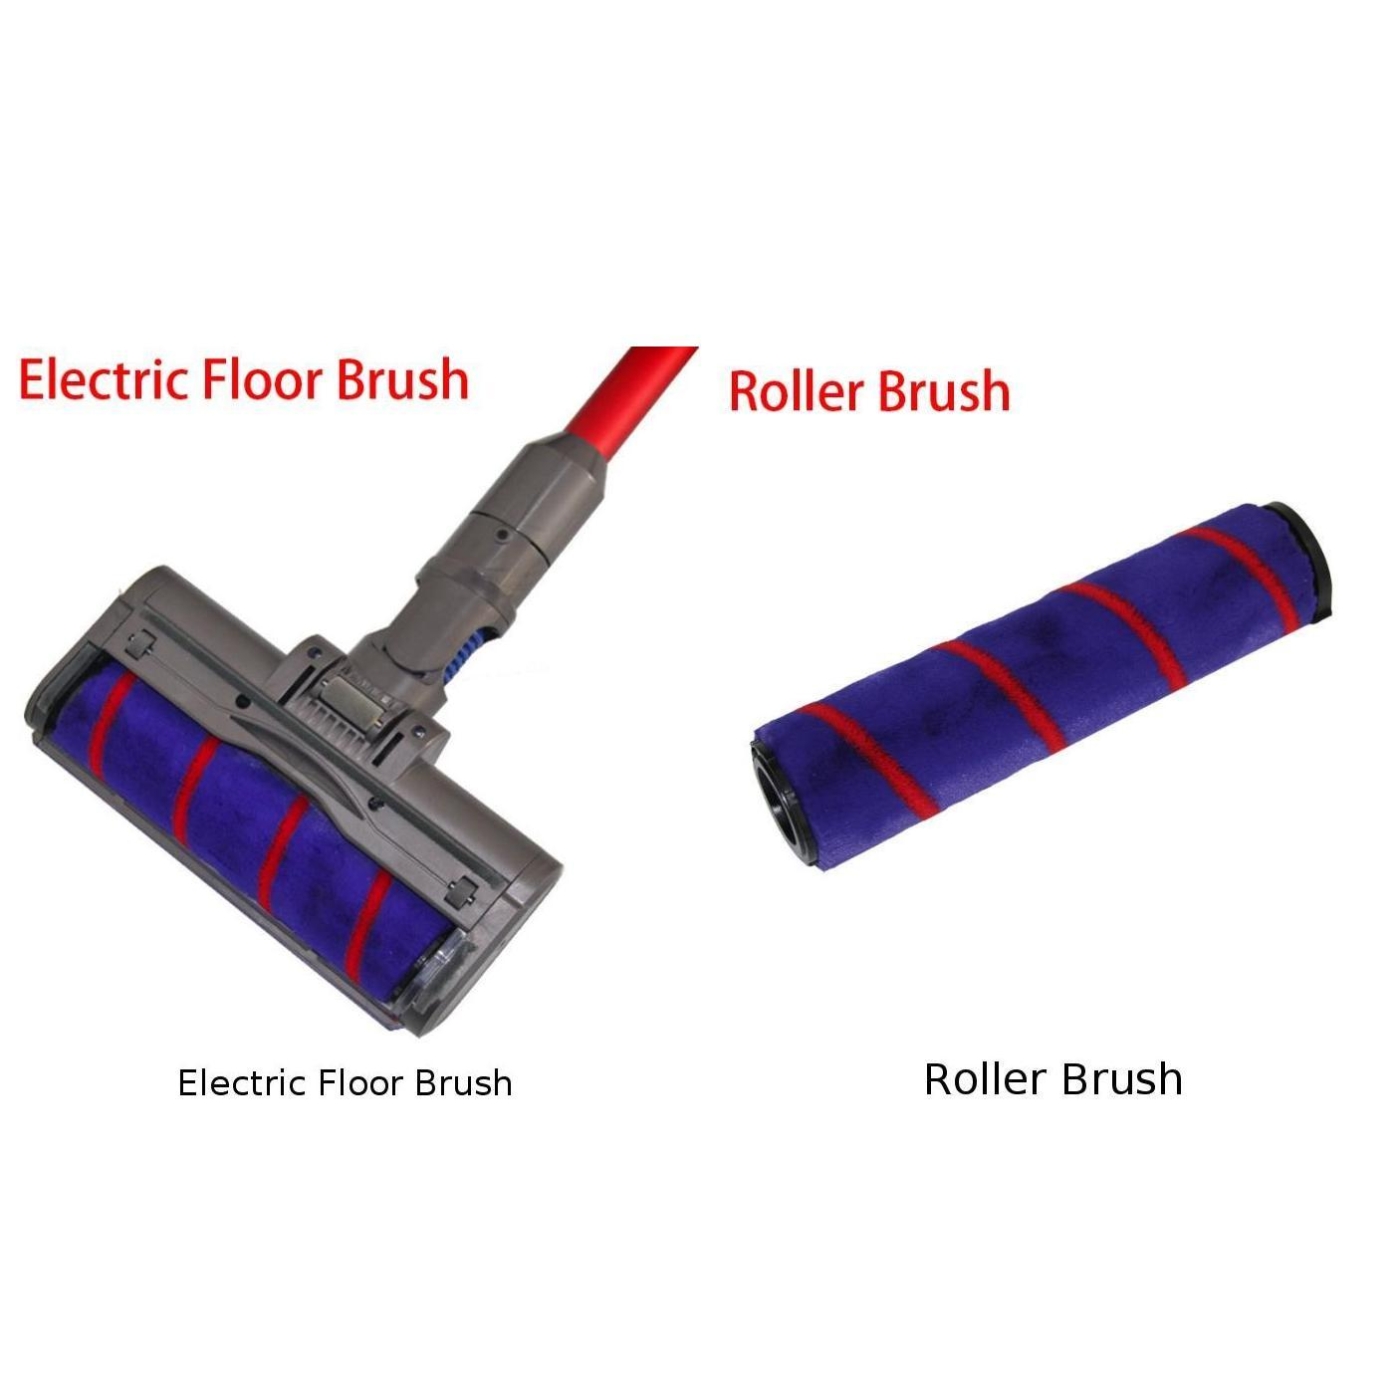 Fluffy Electric Floor Brush For Dyson V7 V8 V10 V11 Vacuum Cleaner Tools Parts Sweeper Robot Cleaning Vacuuming Tools Accessory